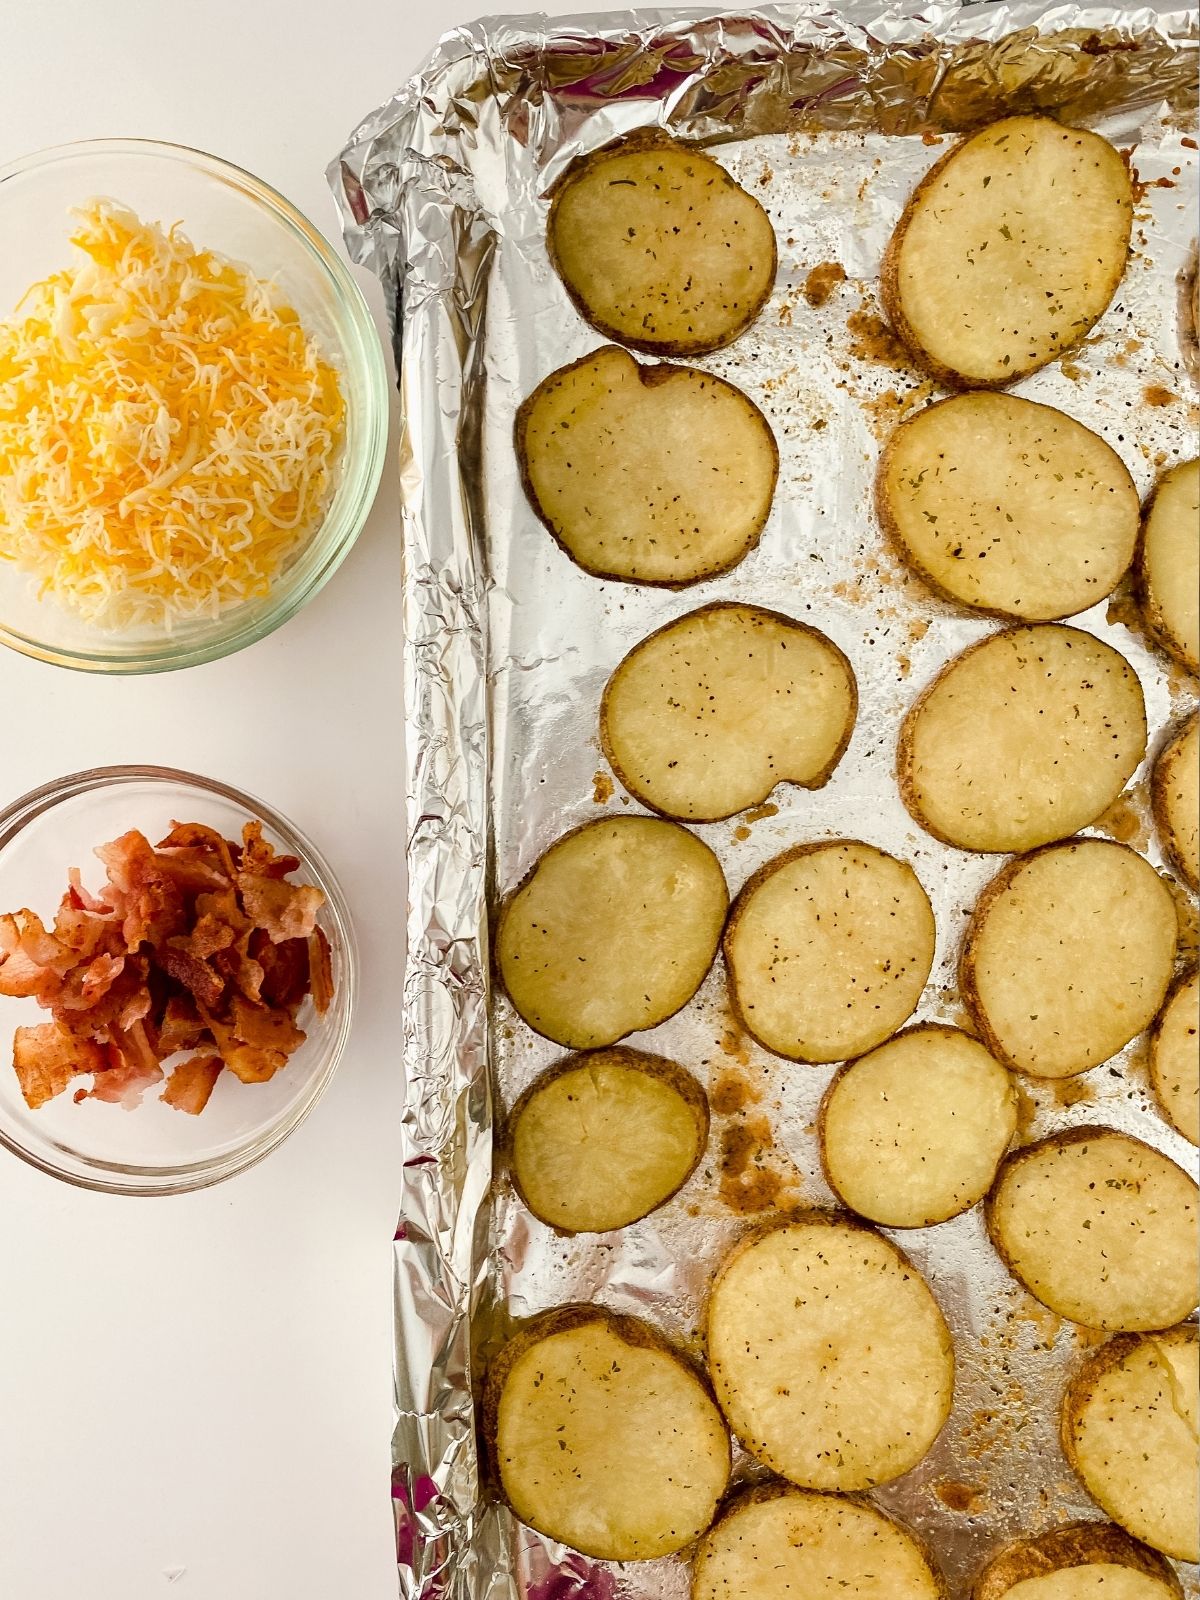 baked potato slices on baking tray with bowl of bacon and cheese.